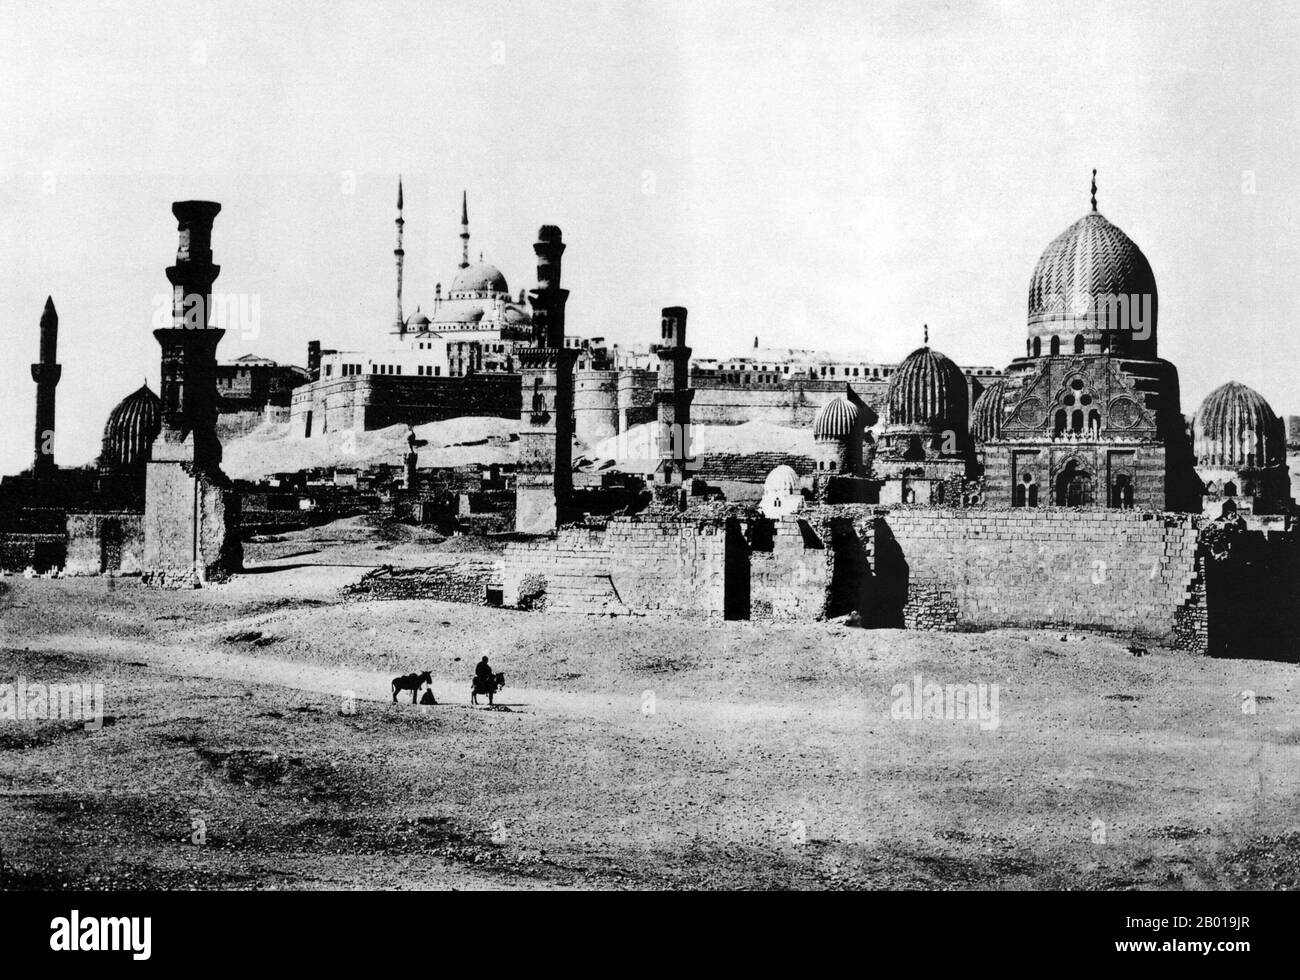 Egypt: Cairo, photographed by Francis Frith (31 October 1822 - 25 February 1898), 1856.  Francis Frith, also spelled Frances Frith, was an English photographer of the Middle East and many towns in the United Kingdom. In 1850, he started a photographic studio known as Frith & Hayward in Liverpool. A successful grocer, and later, printer, Frith fostered an interest in photography, becoming a founding member of the Liverpool Photographic Society in 1853. He journeyed to the Middle East on three occasions, the first of which was a trip to Egypt in 1856. Stock Photo